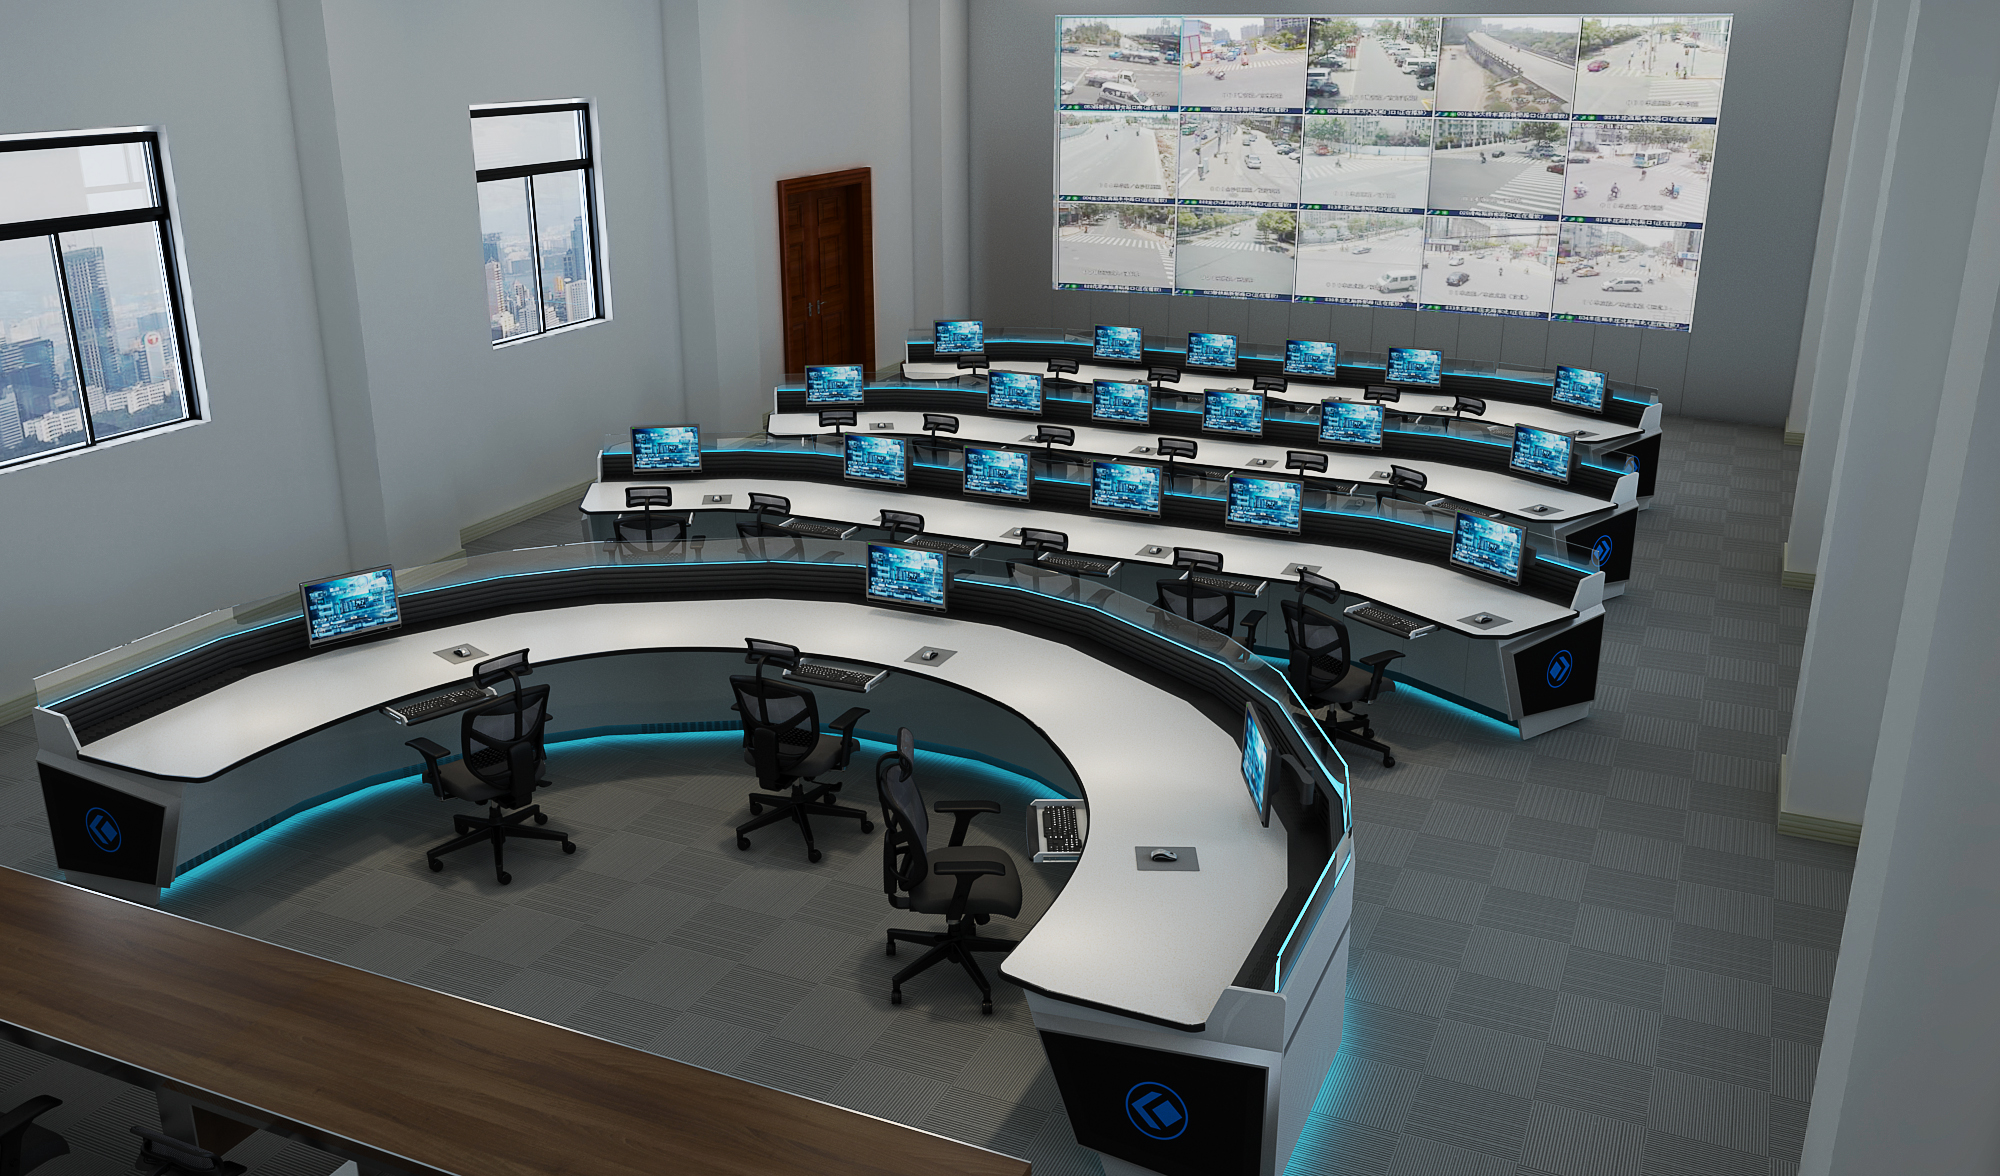 What are the benefits of the control room console?